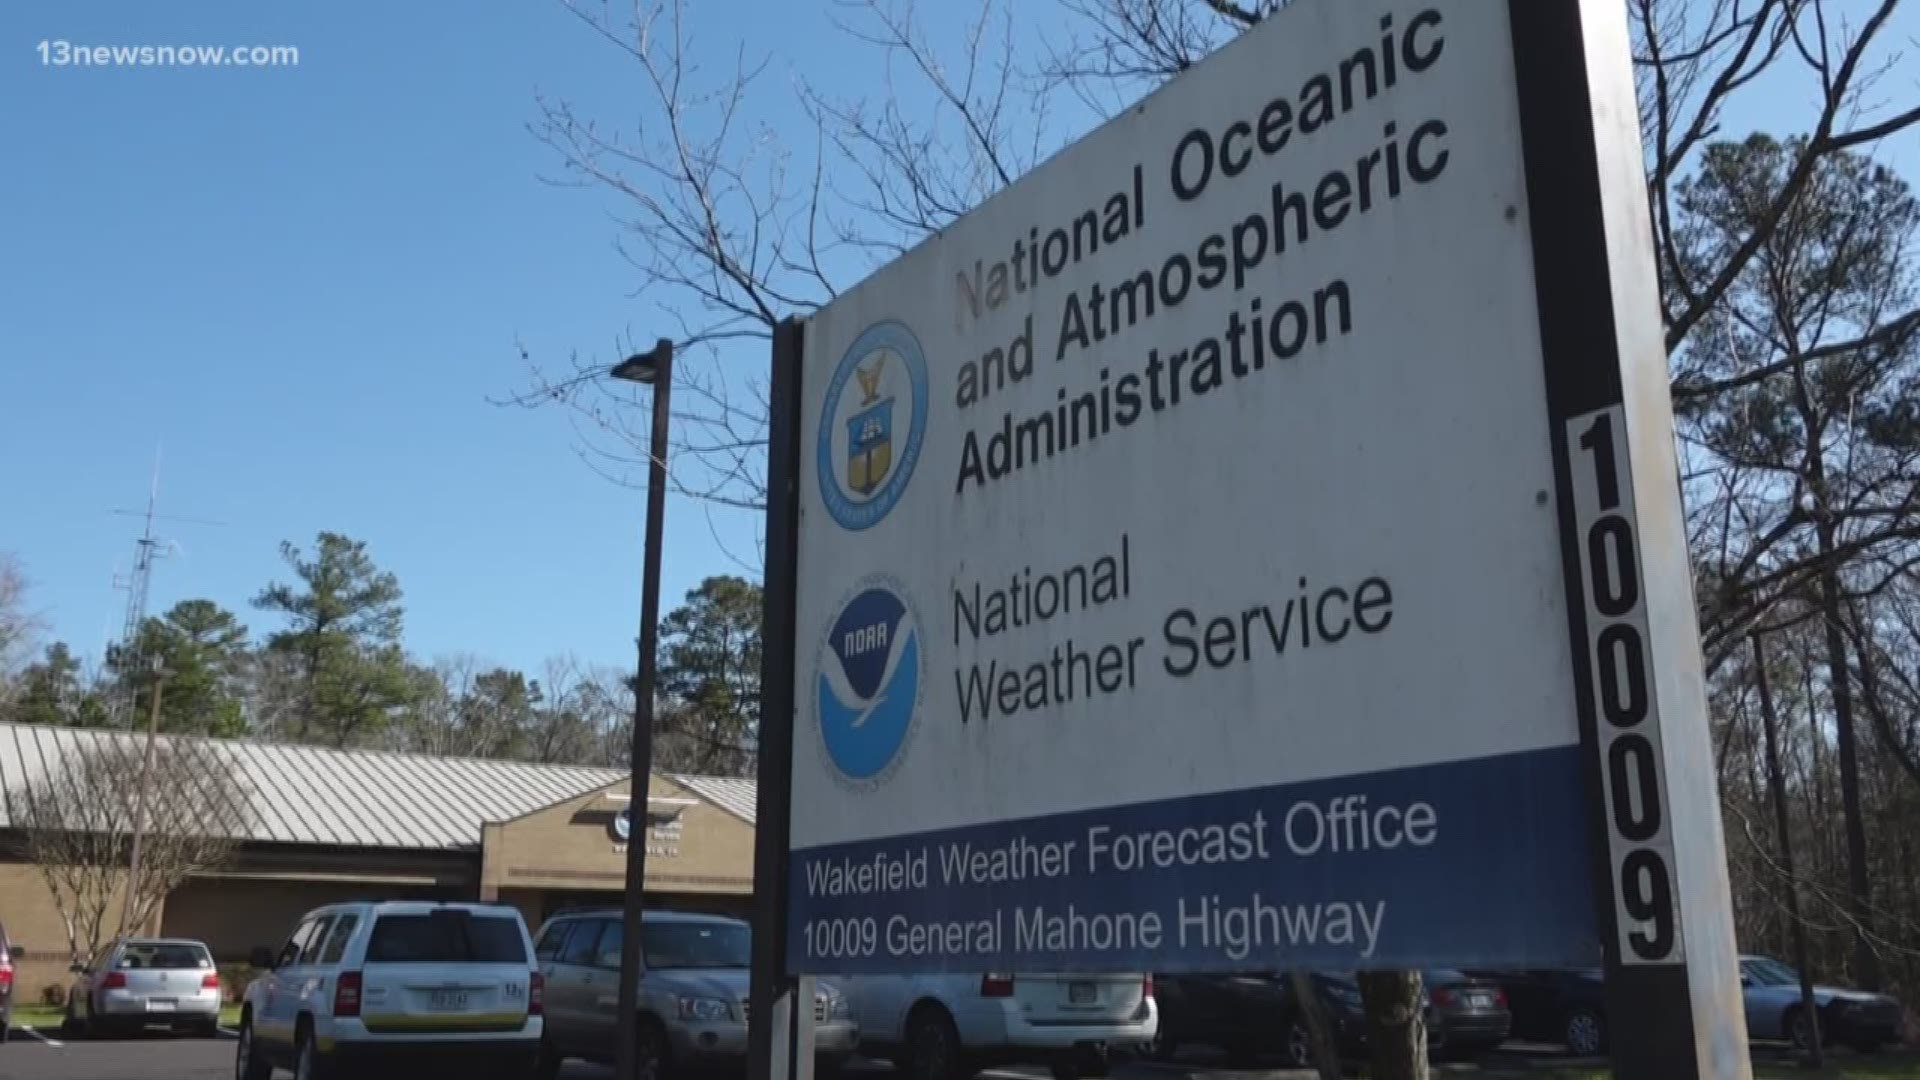 13News Now Rachael Peart visited the National Weather Service hub in Wakefield to learn more about how meteorologists there keep the region informed on the weather.